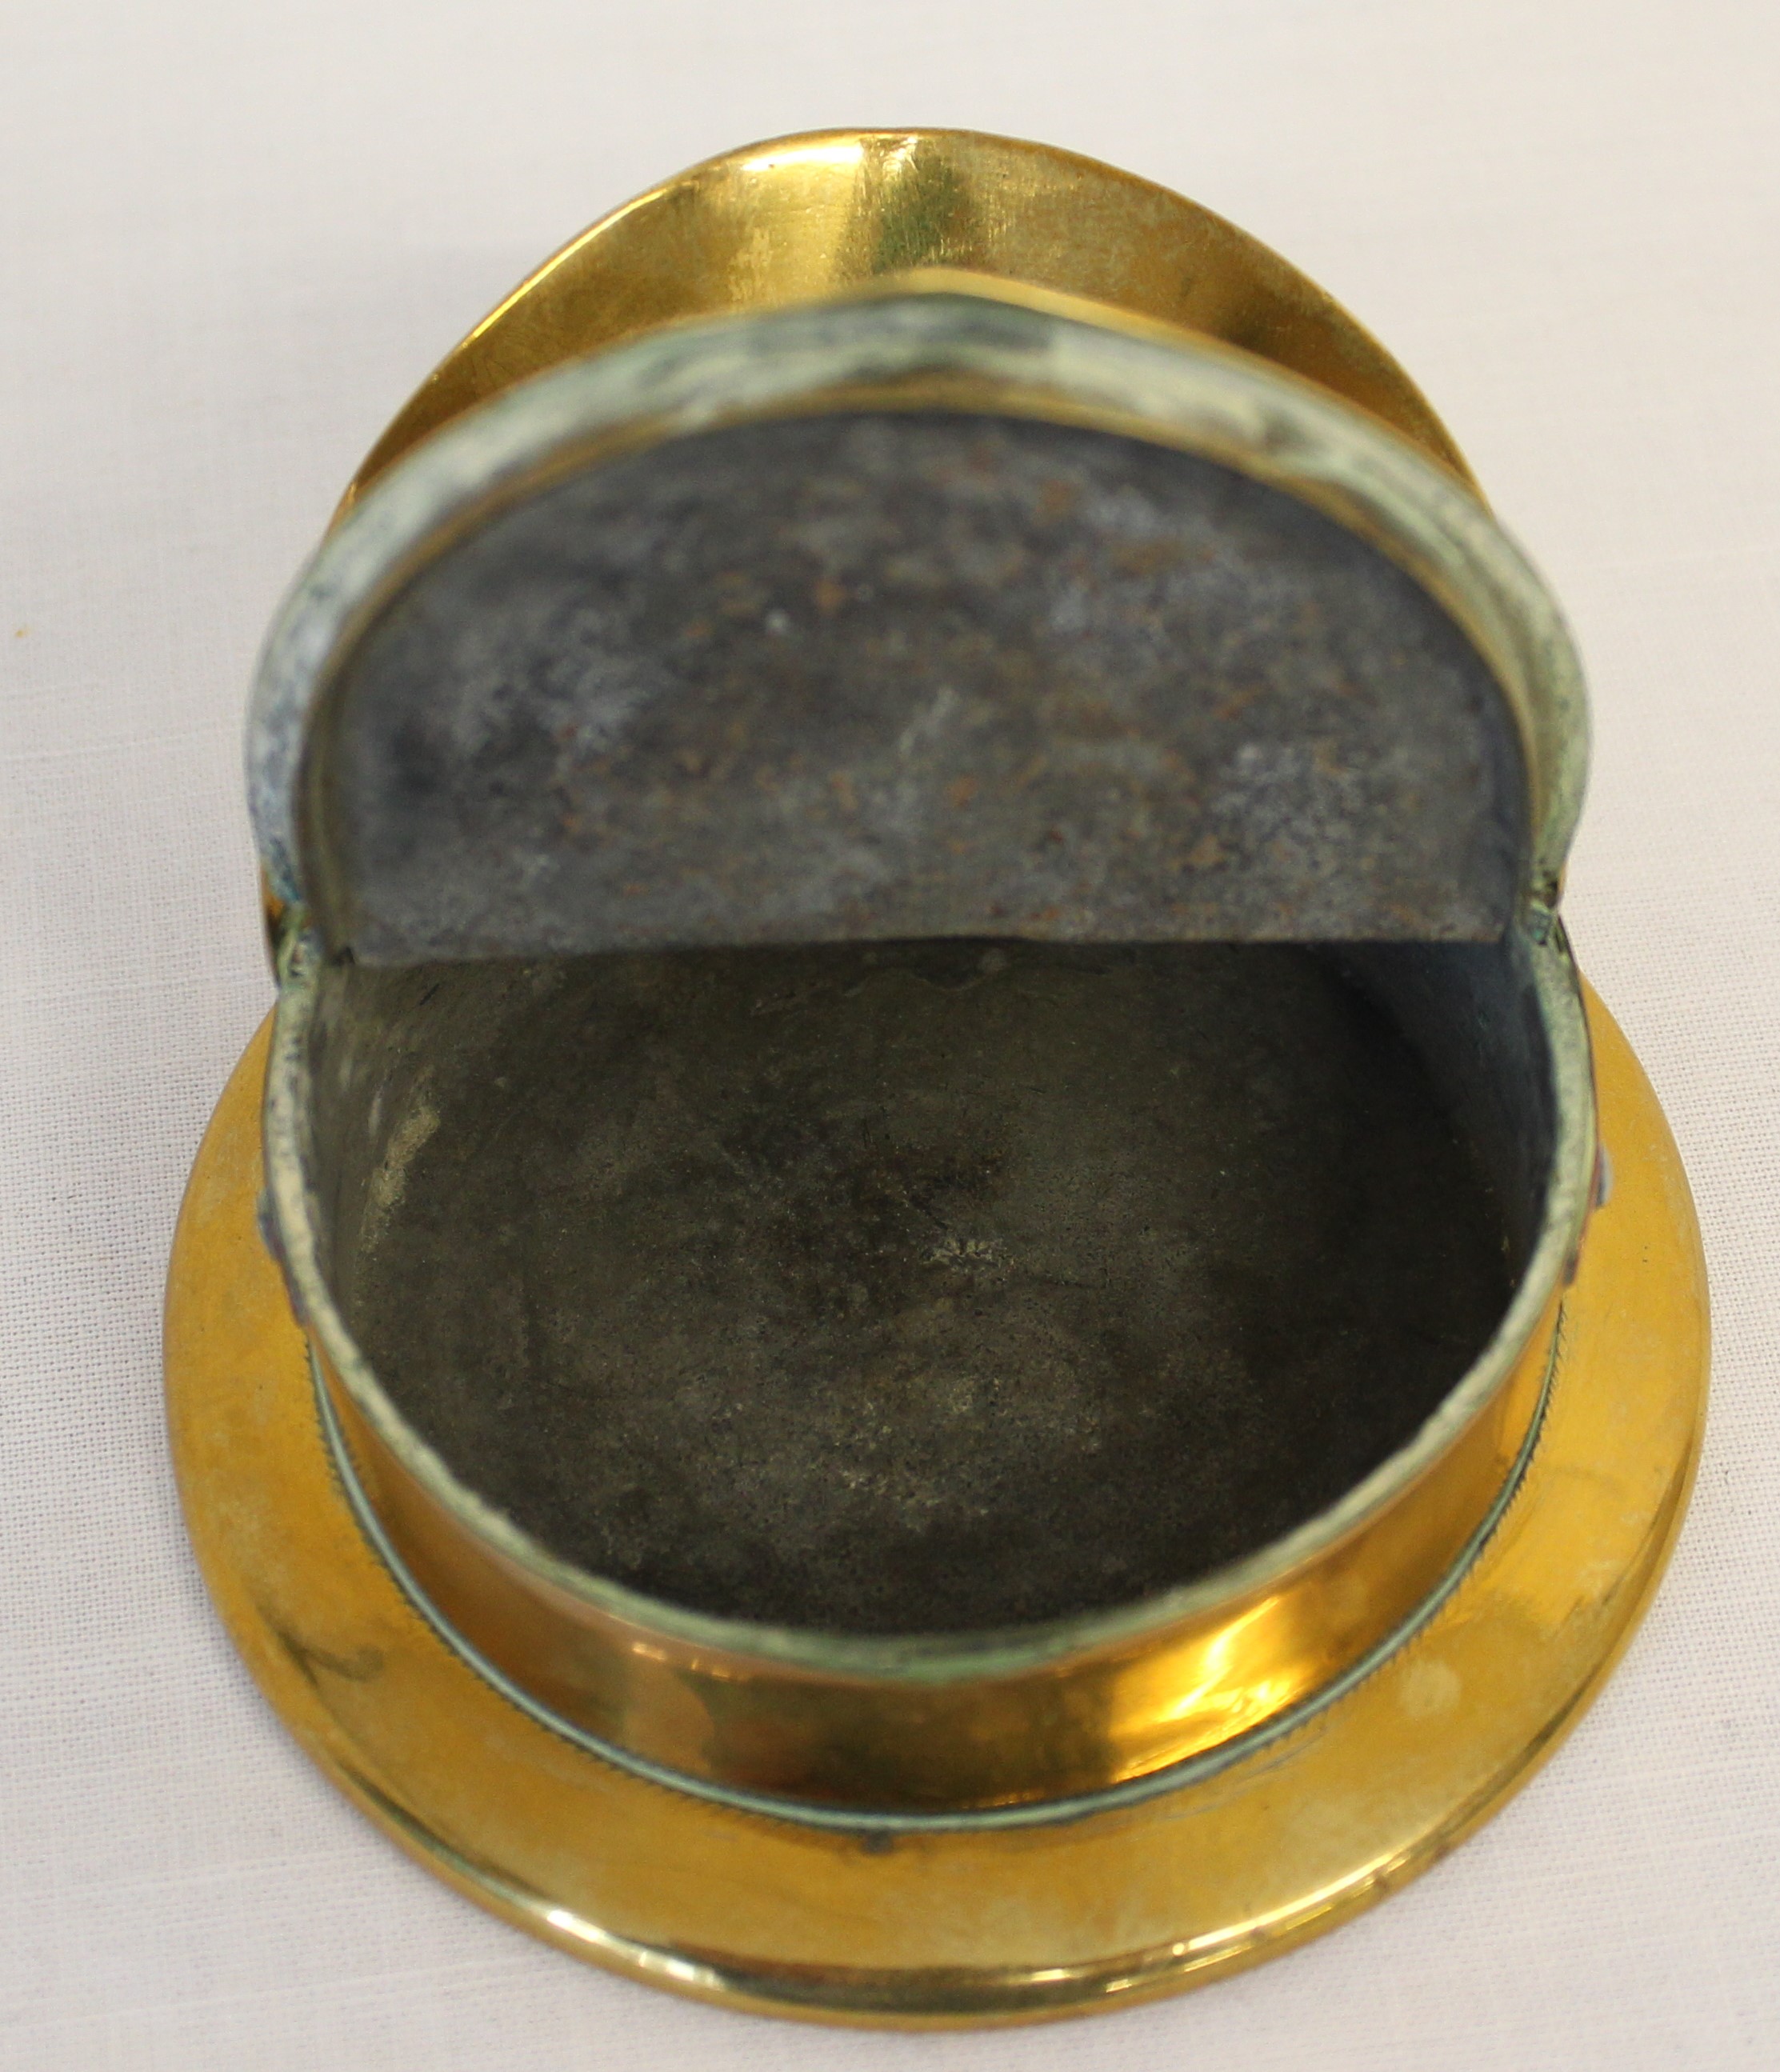 A superb WW1 trench art snuff box or ashtray made from a brass shell case in the form of an - Image 4 of 4